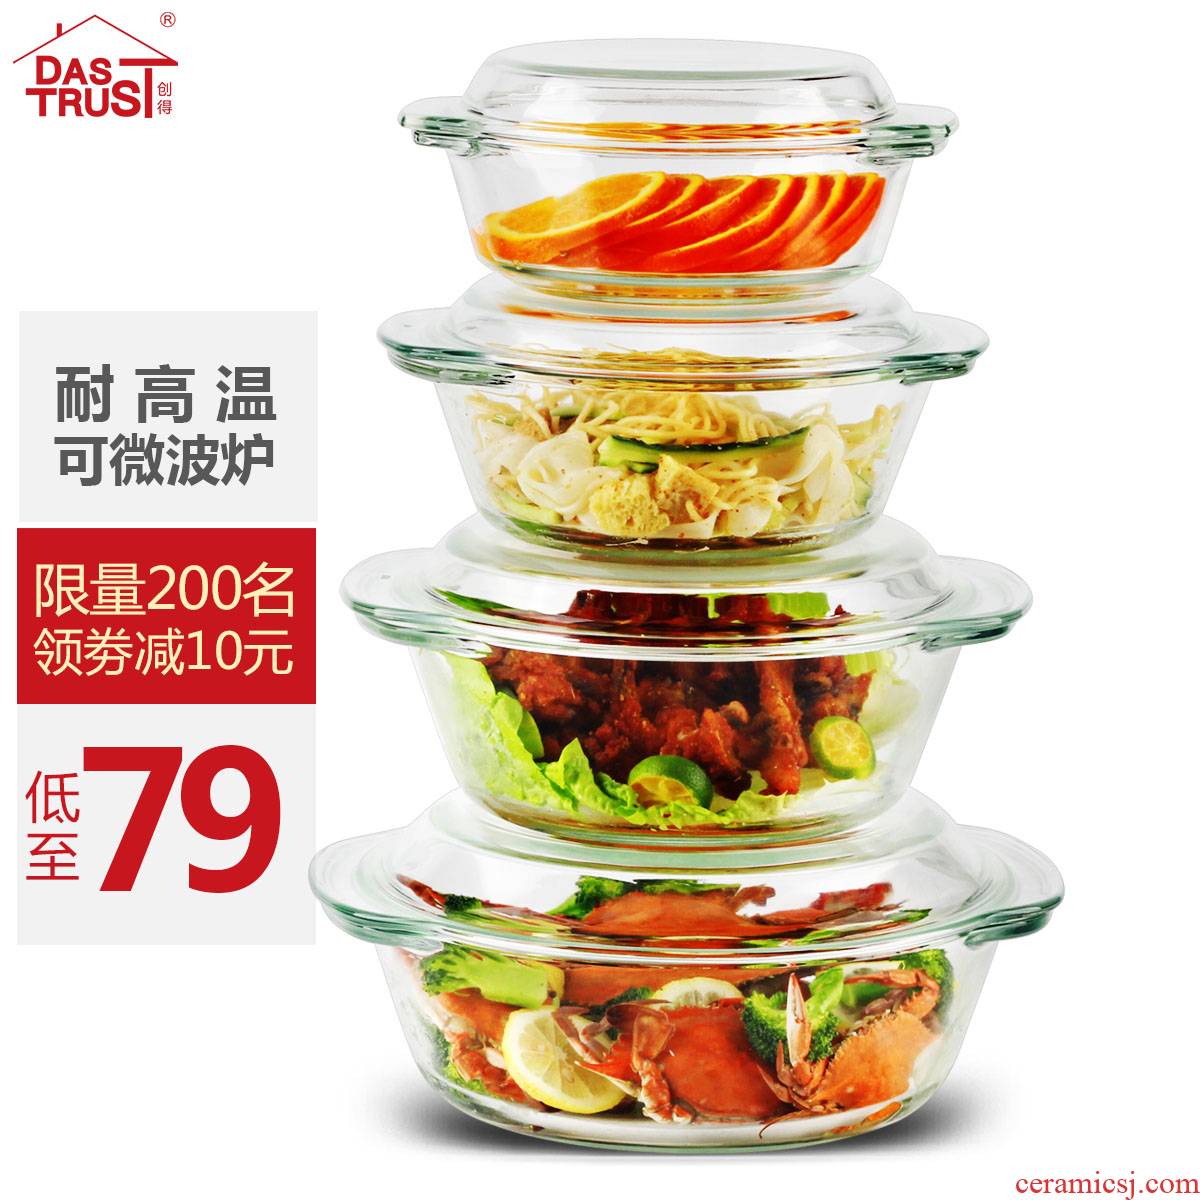 Gen heat - resistant glass bowl household suit glass plate tableware, informs the for microwave oven pan boil for 4 times